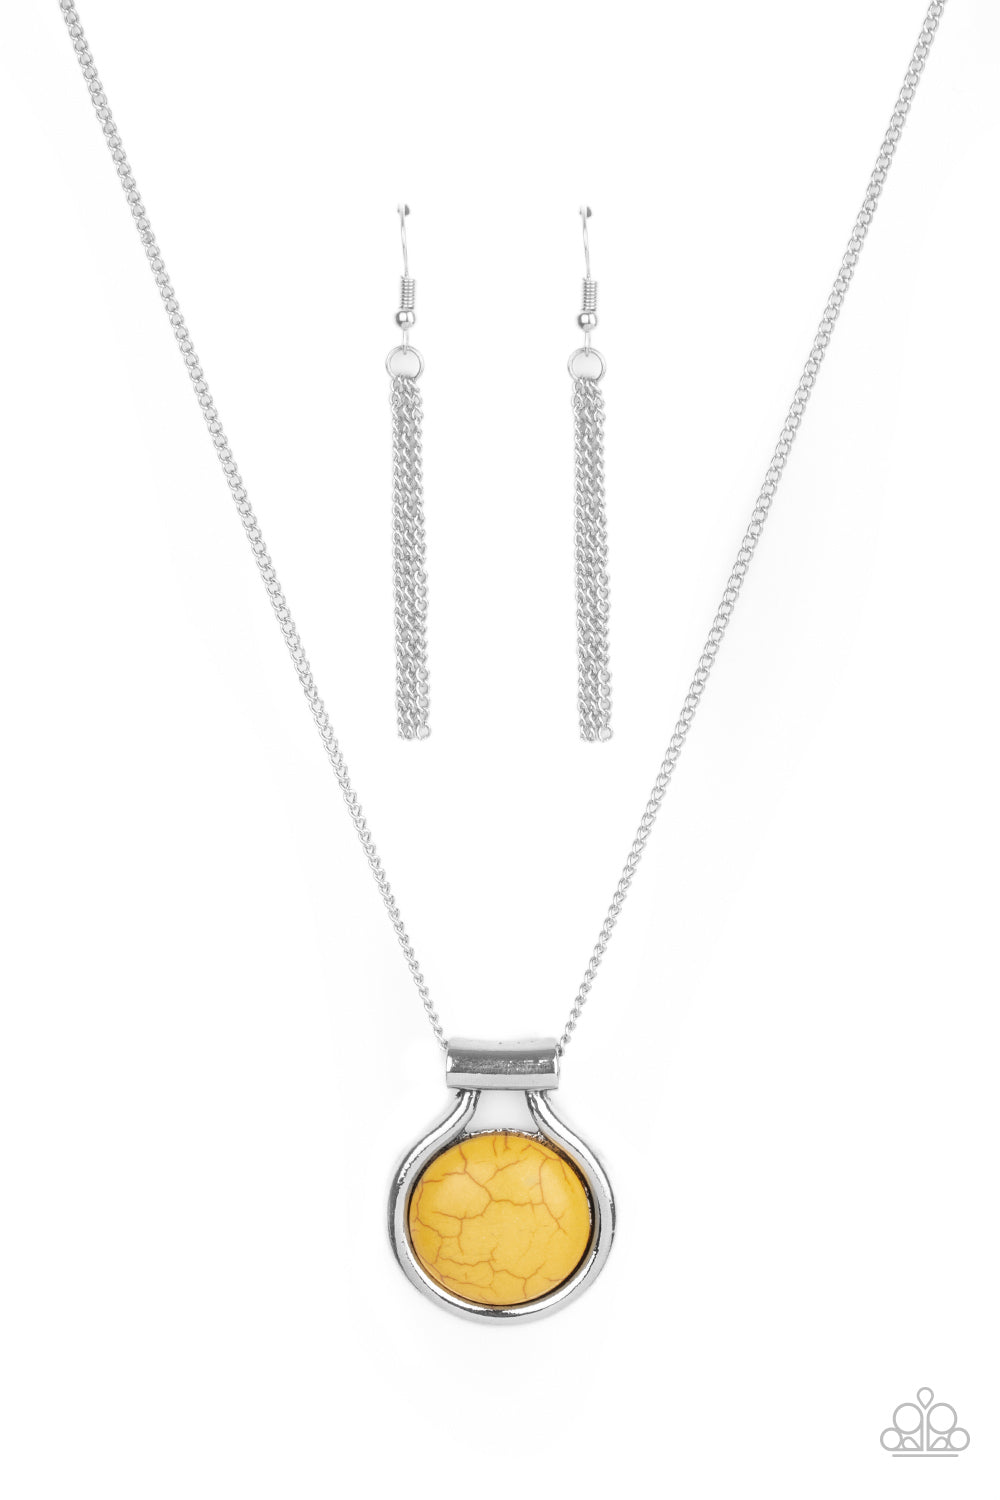 Patagonian Paradise - Yellow ***COMING SOON*** - Bling With Crystal